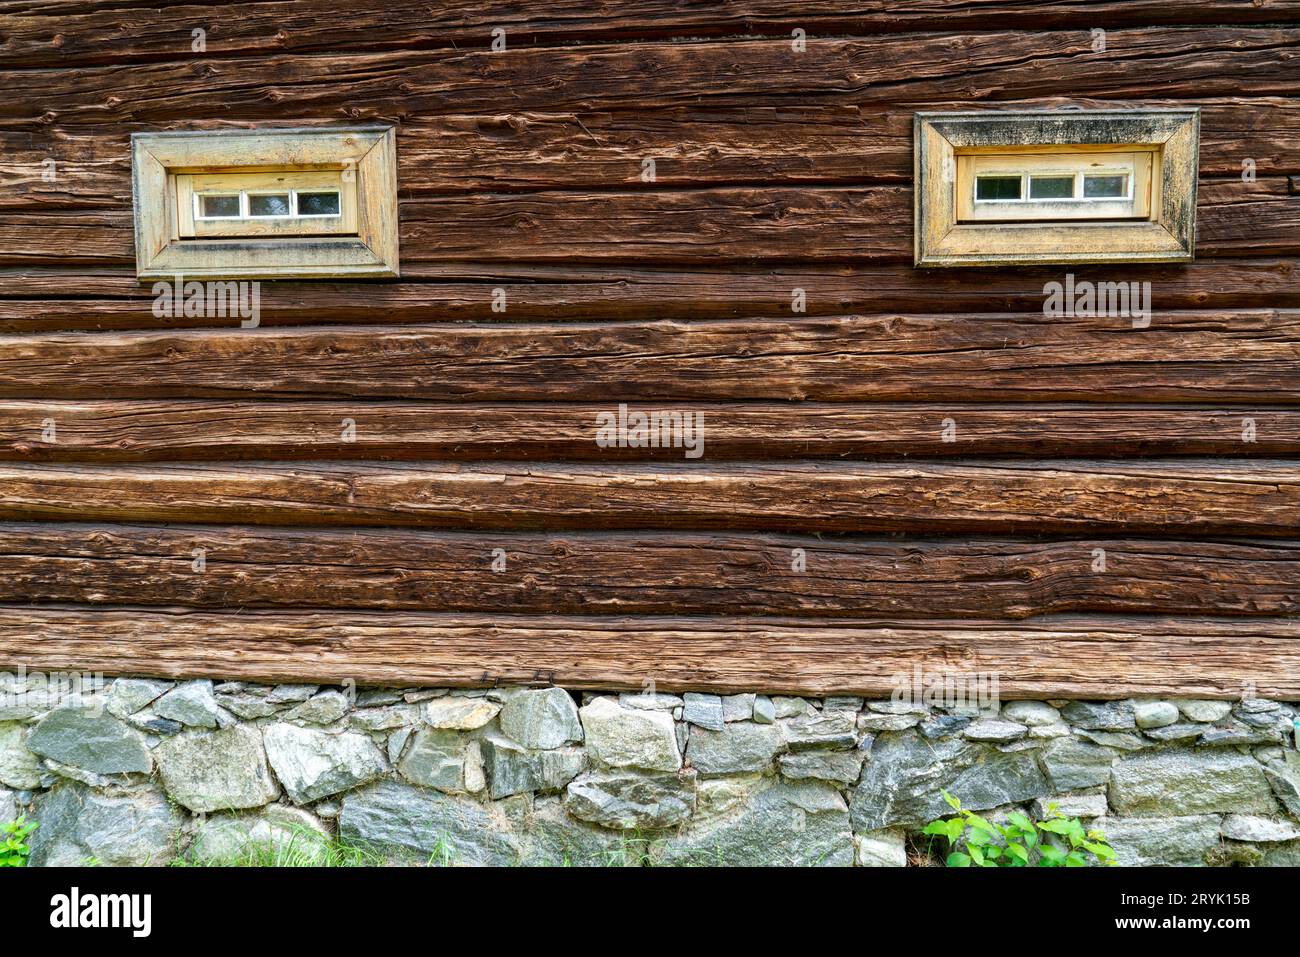 Farmhouses and barns in the open-air museum Dokka, Norway Stock Photo